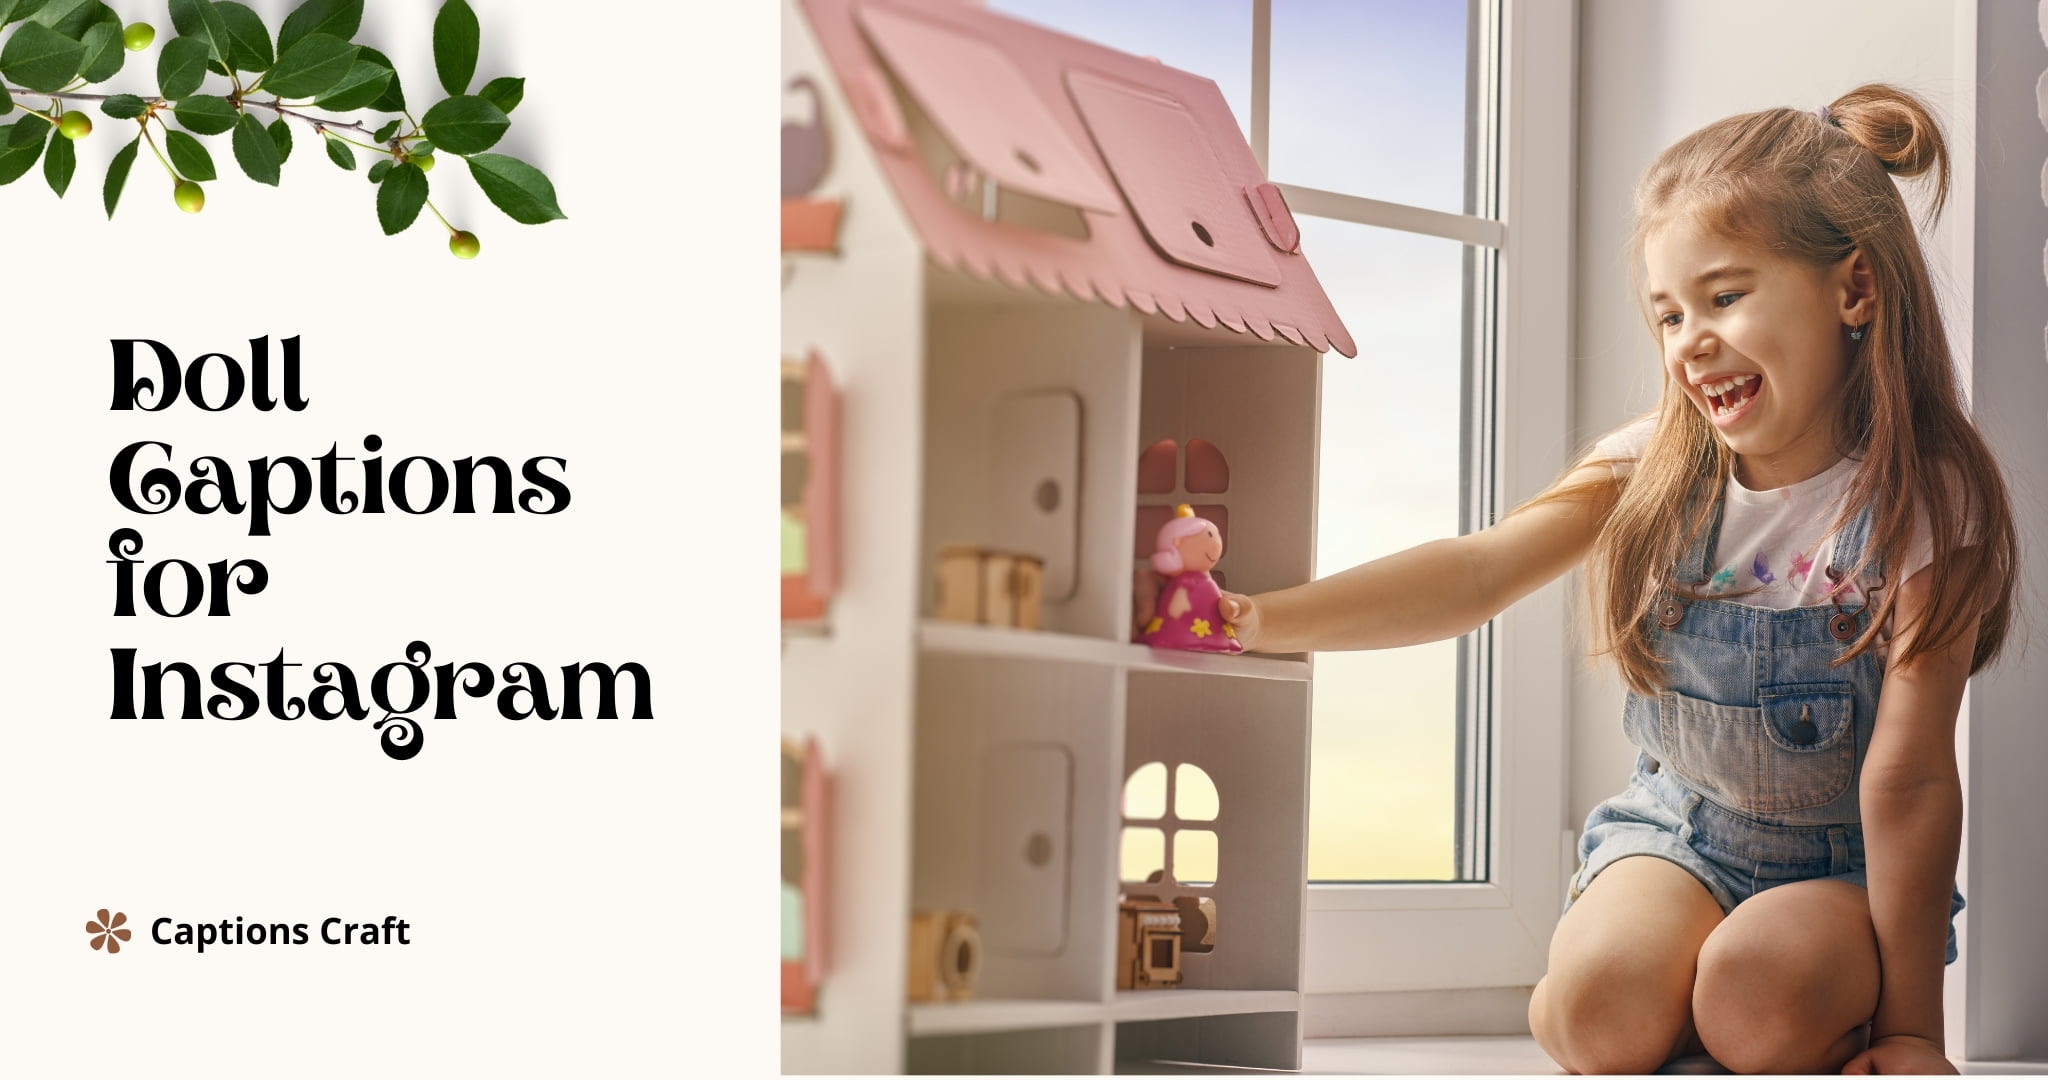 A collection of creative doll captions for Instagram, perfect for adding charm and personality to your doll-themed posts. #DollCaptions #Instagram